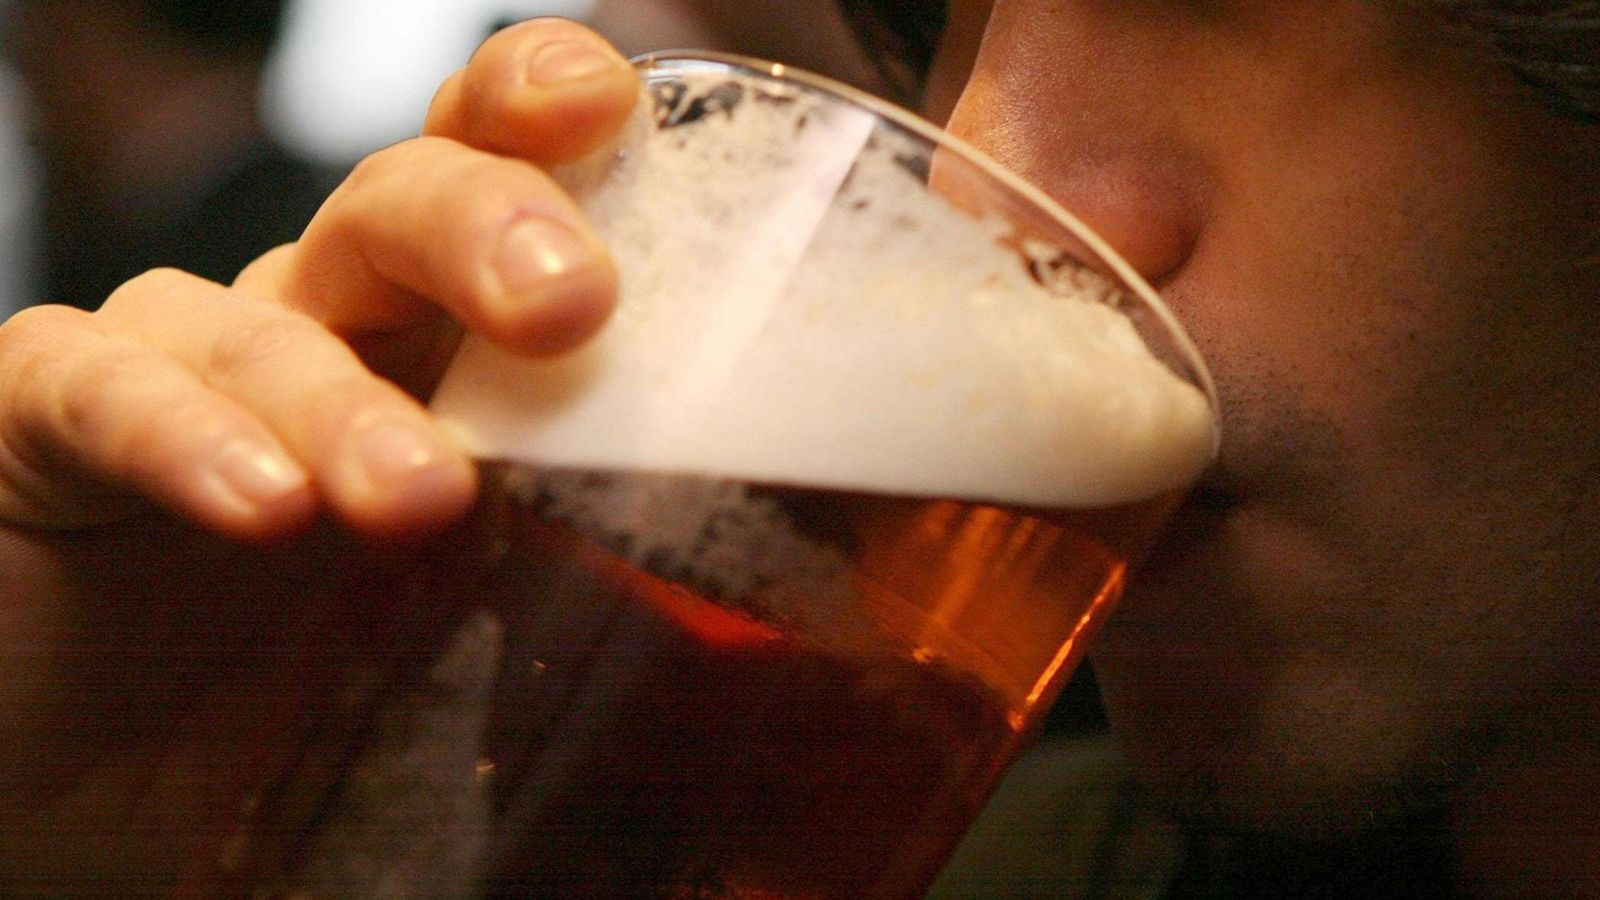 Nearly 2,000 offenders made to wear alcohol-detecting tags this Christmas